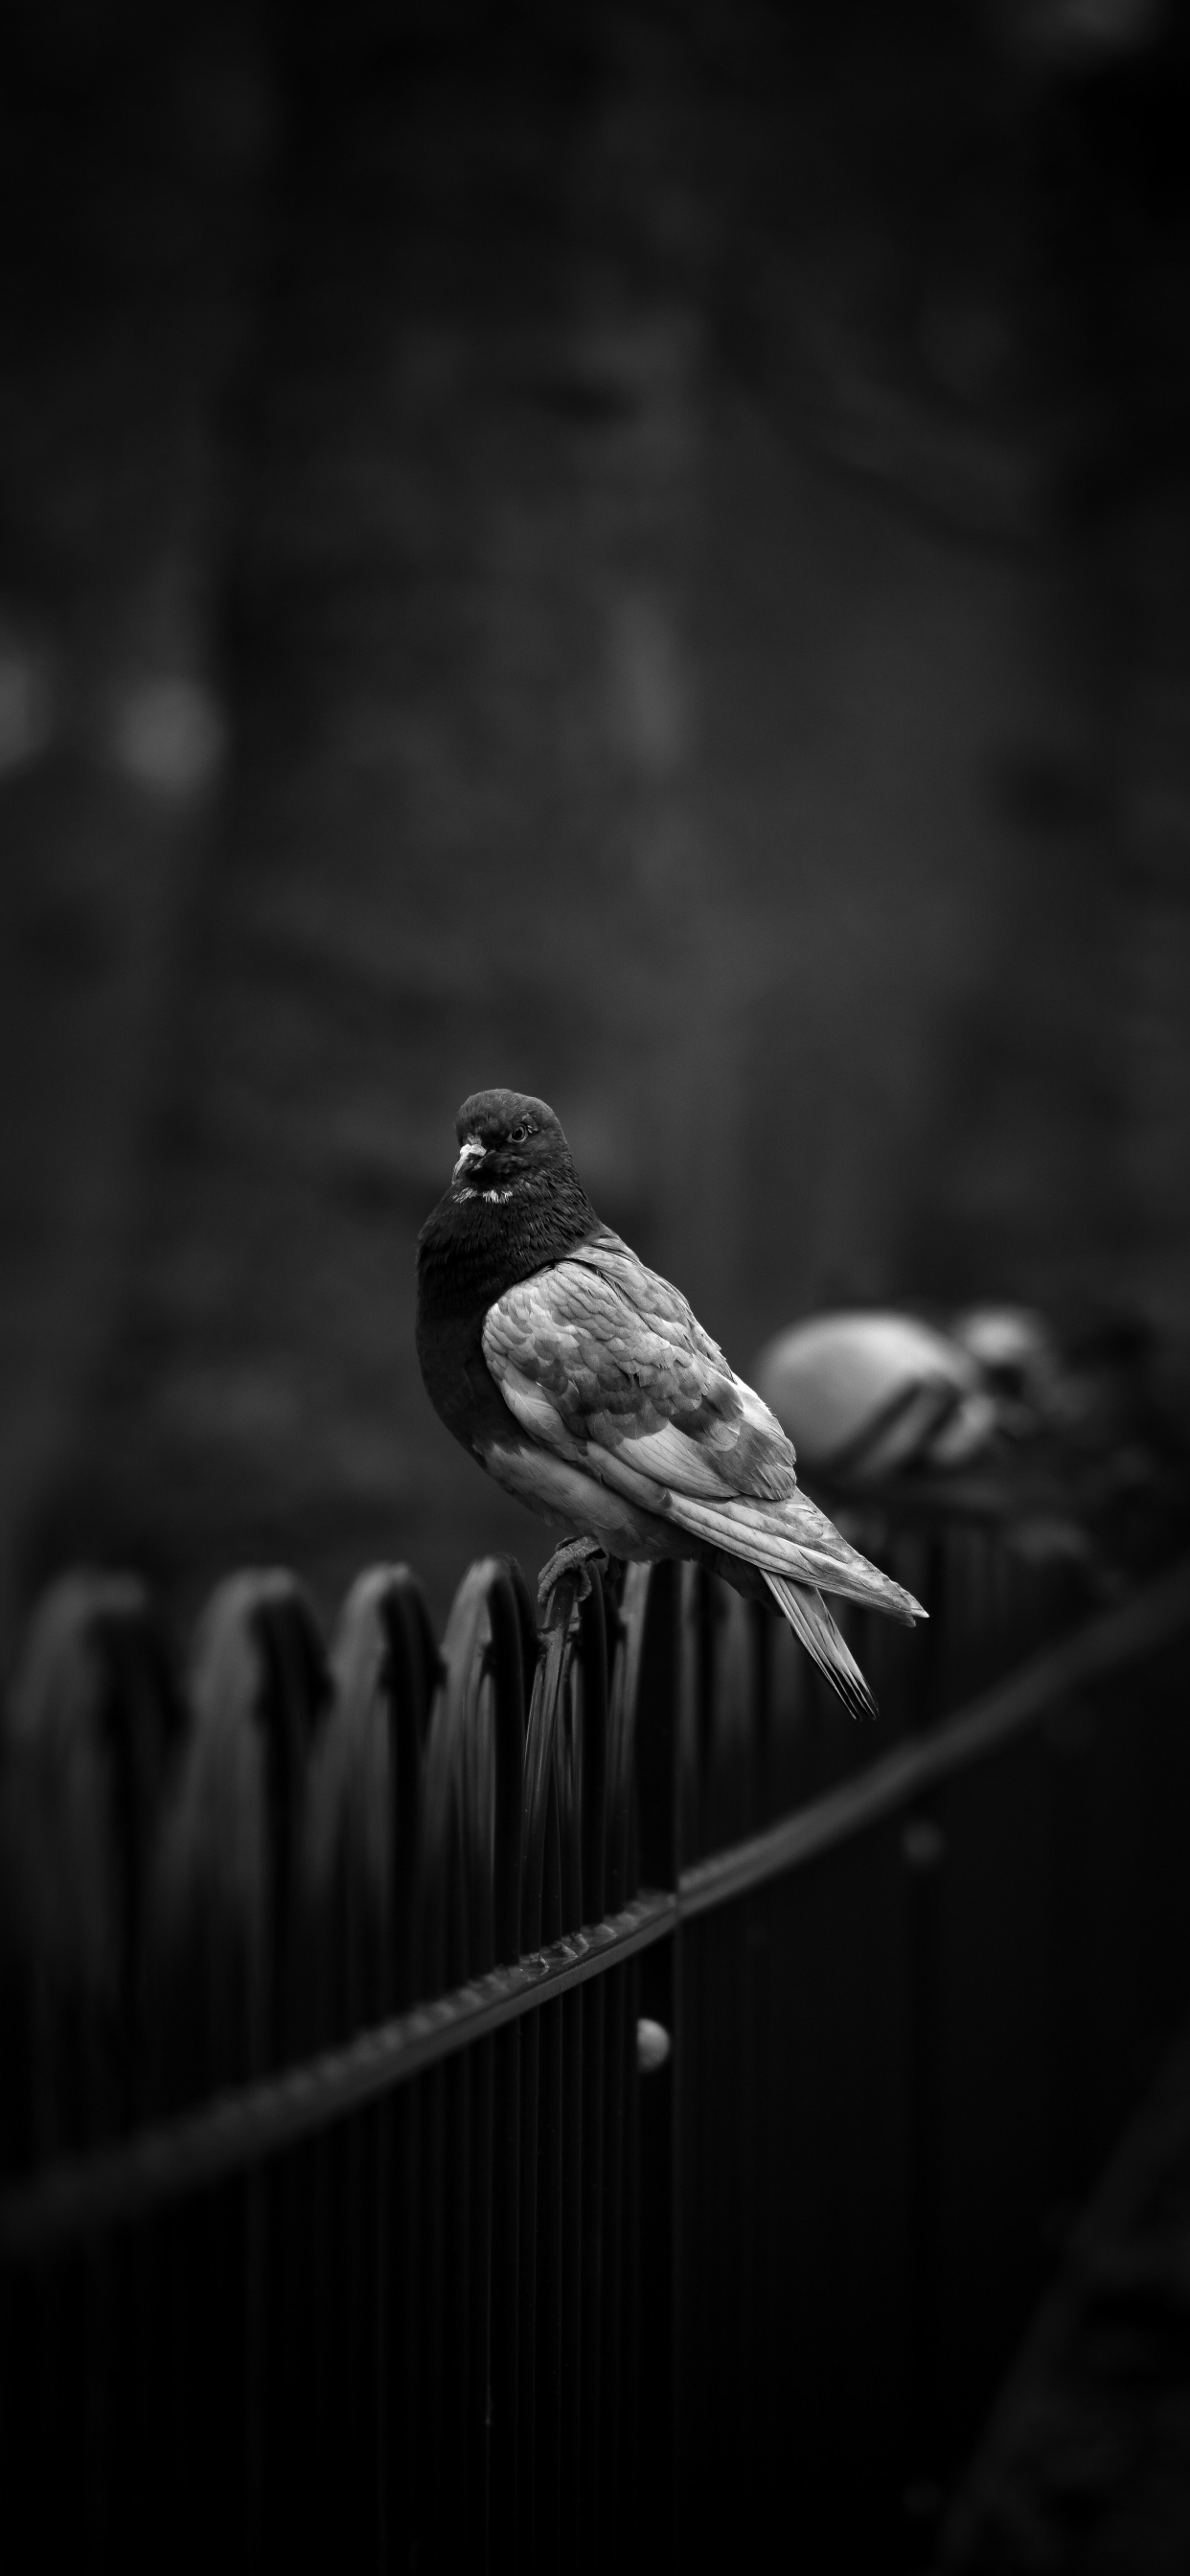 Grayscale Photo of a Bird on a Wooden Fence. Wallpaper in 1242x2688 Resolution